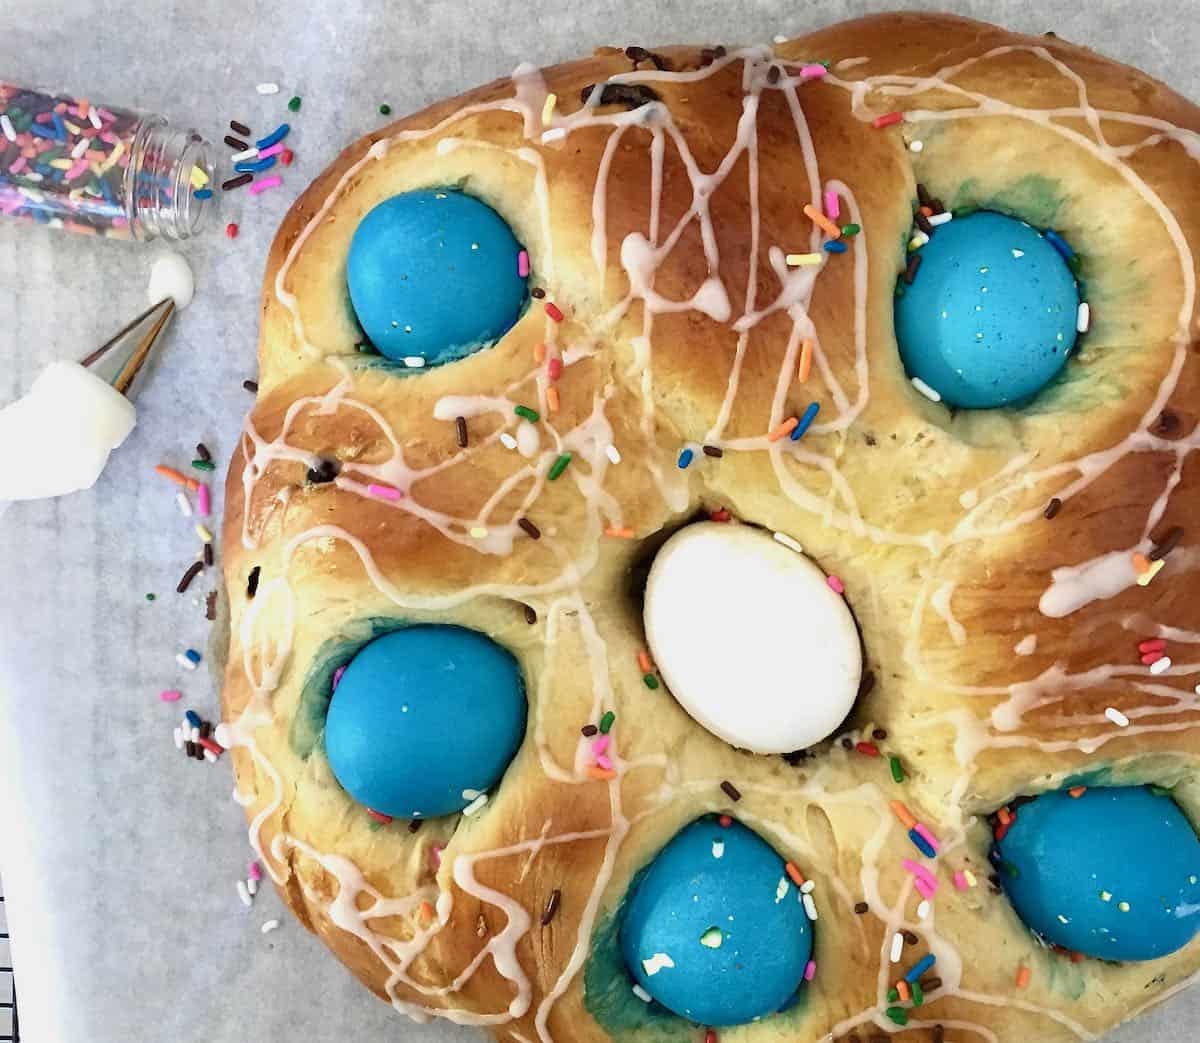 braided Easter bread with sprinkles and colored eggs